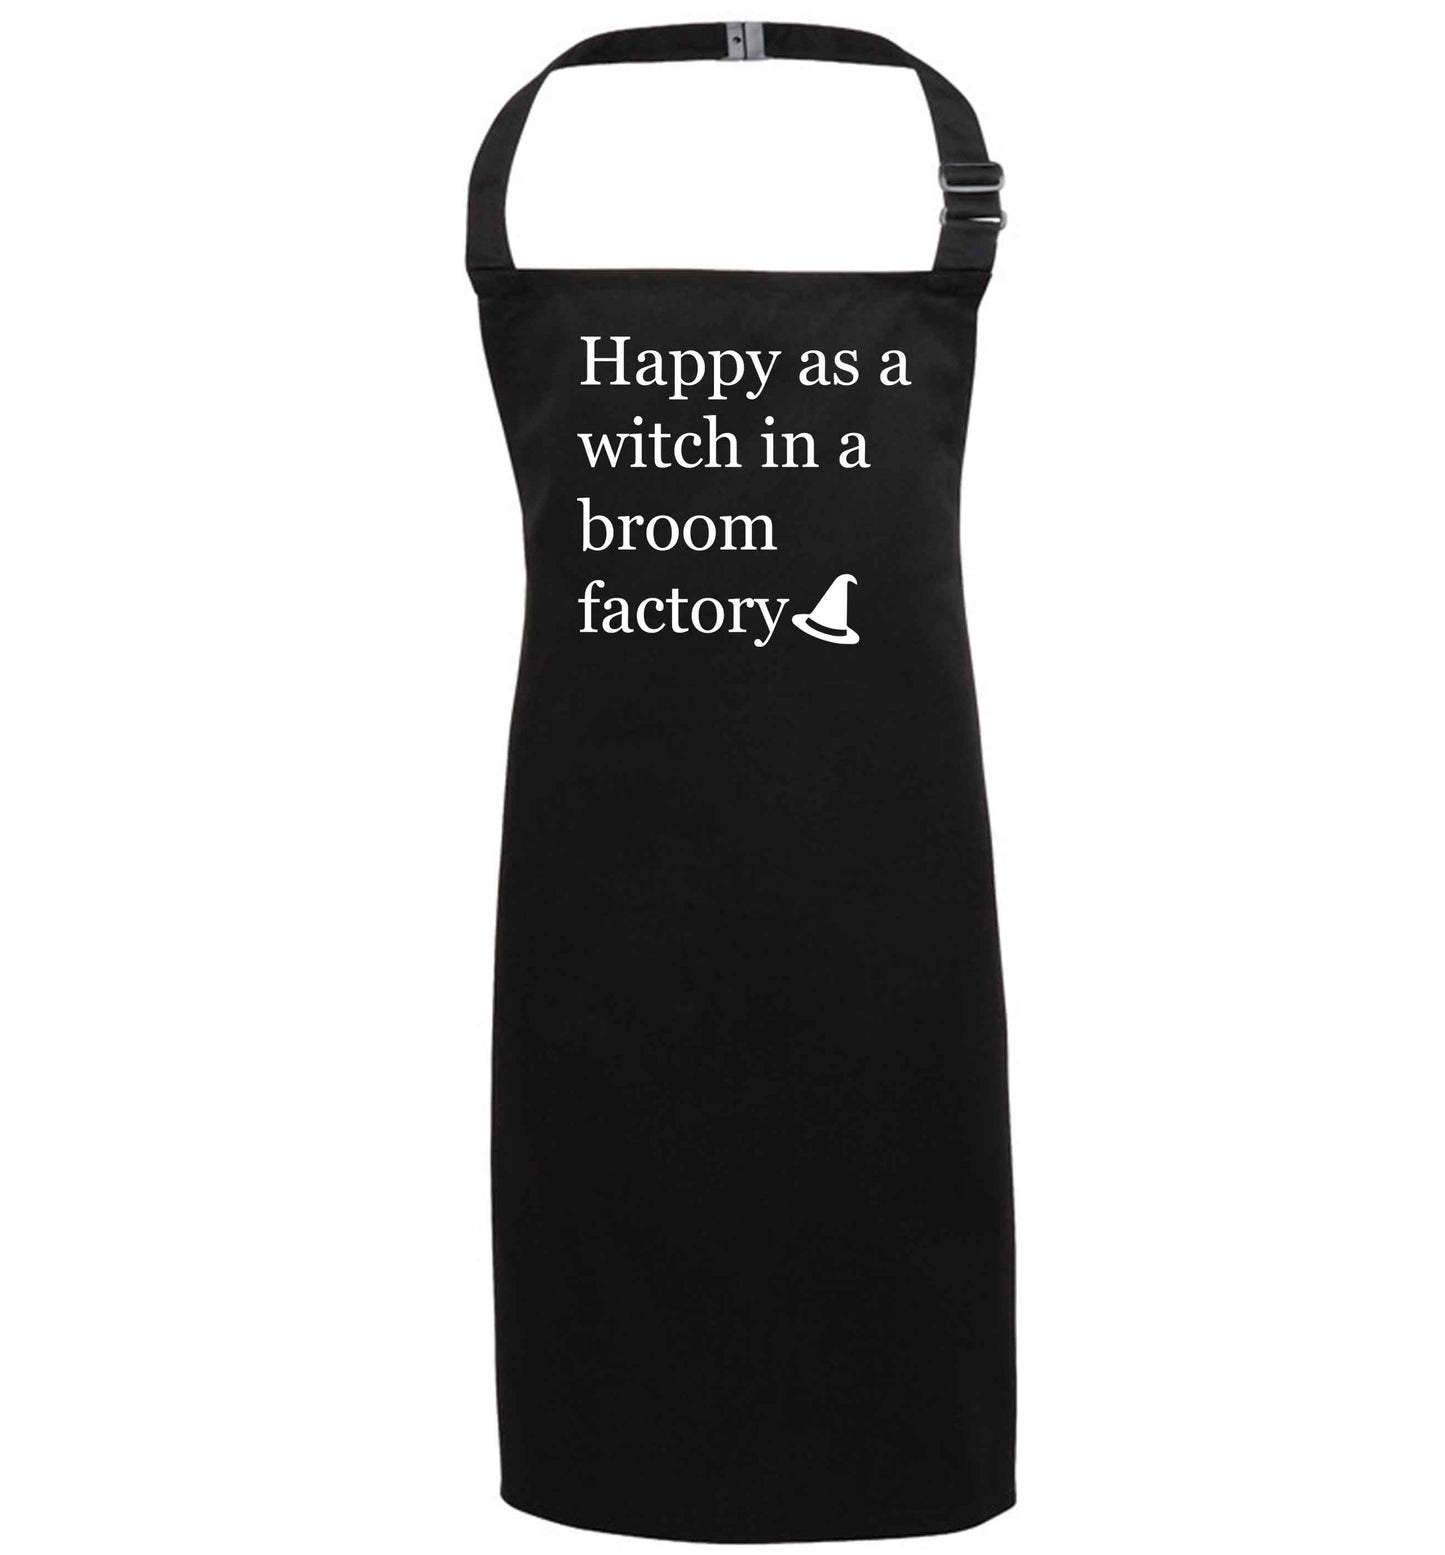 Happy as a witch in a broom factory black apron 7-10 years